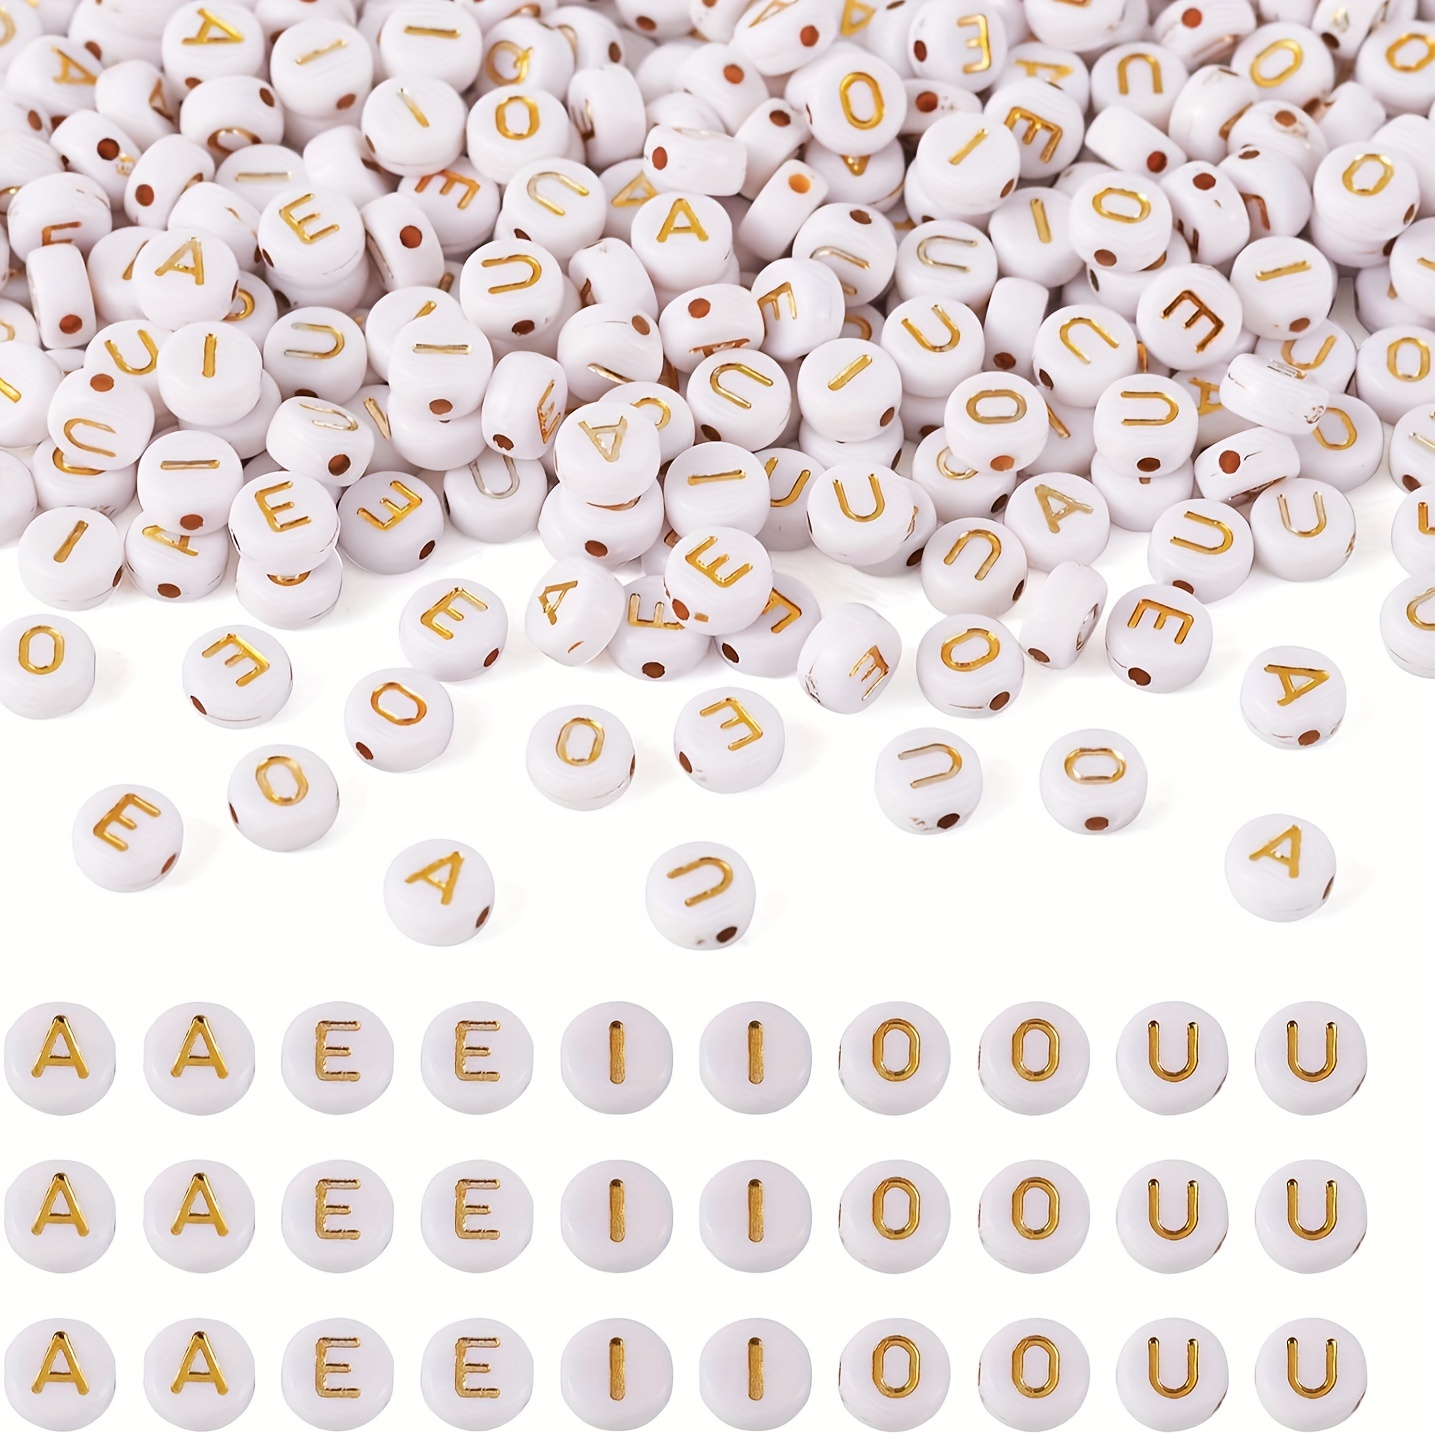 

1000pcs White Golden Vowel Acrylic Letter Beads A/e/i/o/u Initial Beads For Jewelry Making Diy Name Bracelet Necklace Earrings Phone Chain Small Business Supplies